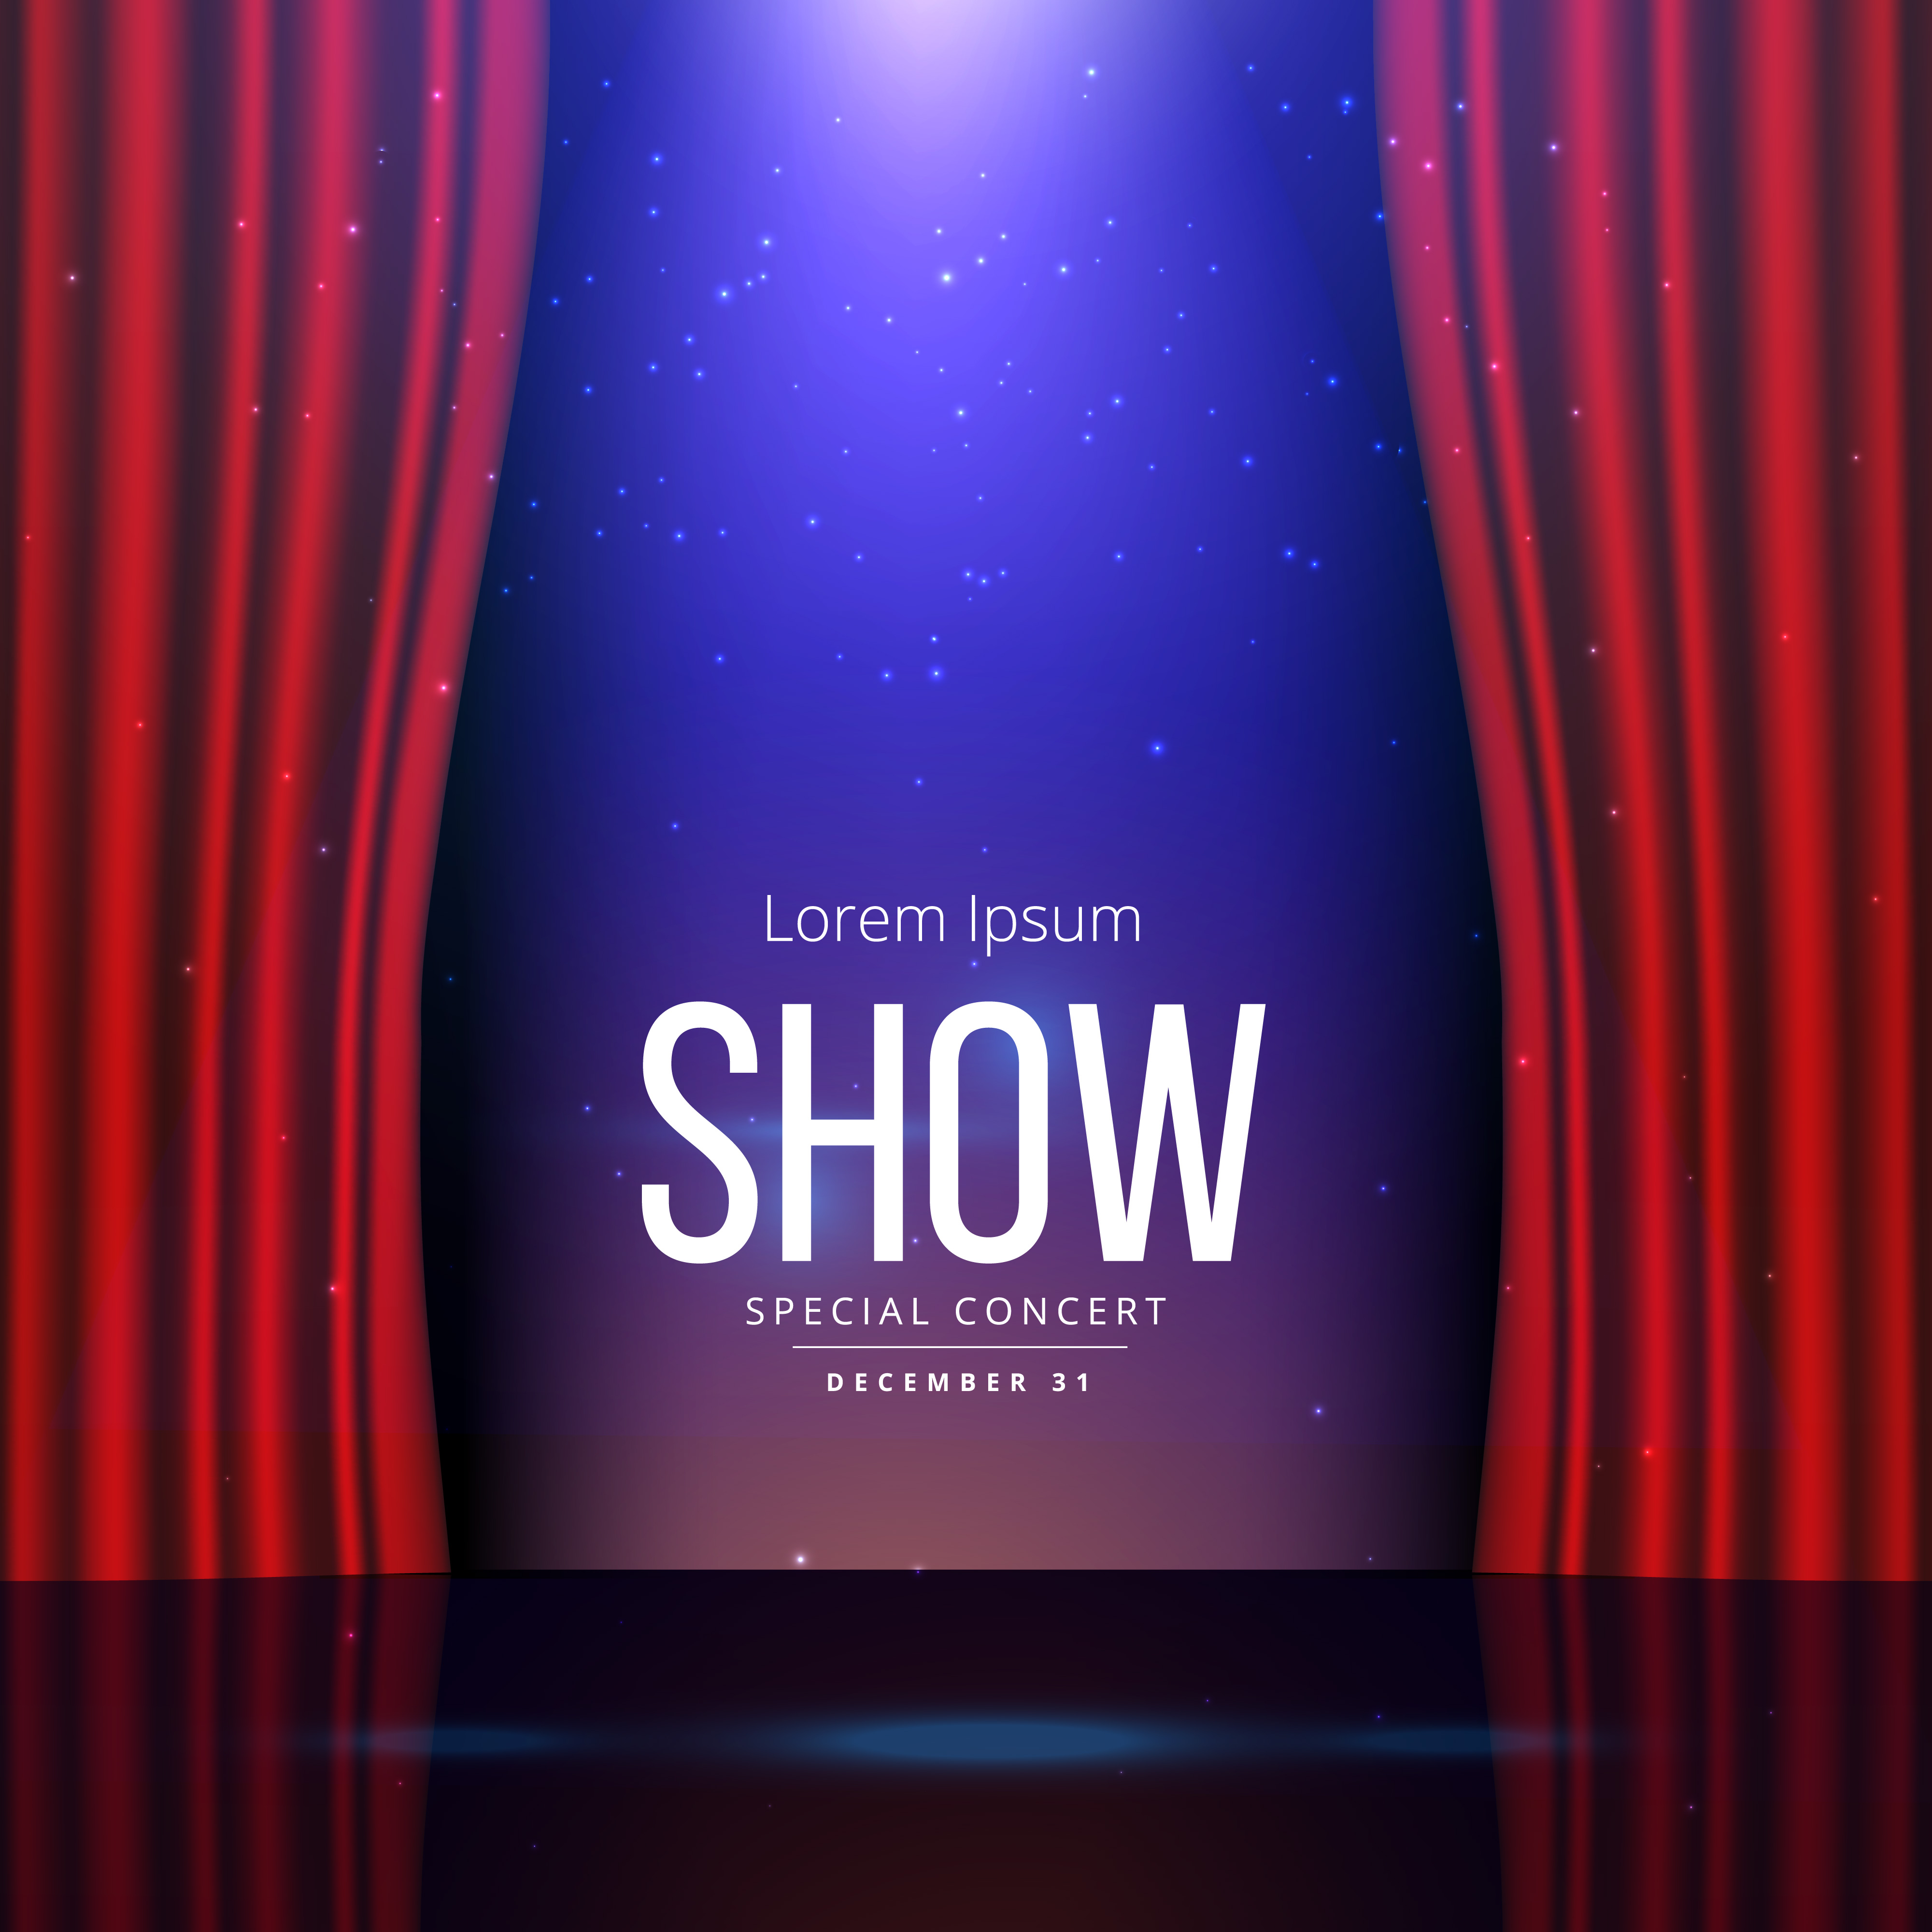 theater stage with open curtains - Download Free Vector Art, Stock